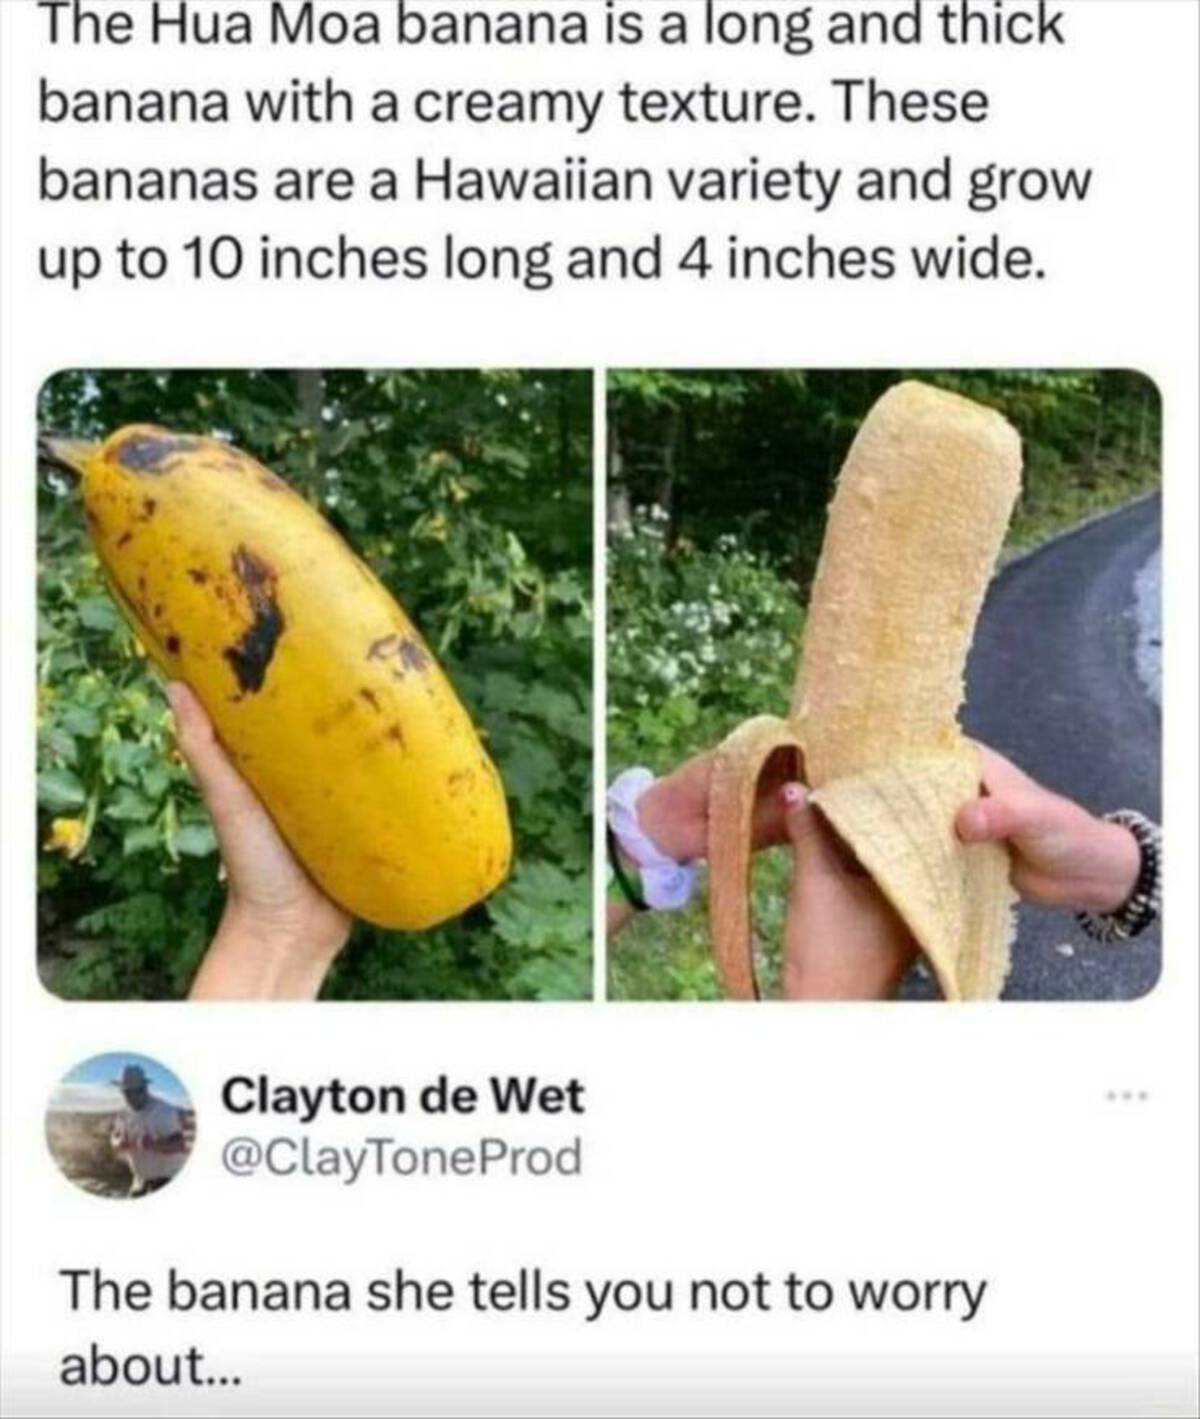 giant banana - The Hua Moa banana is a long and thick banana with a creamy texture. These bananas are a Hawaiian variety and grow up to 10 inches long and 4 inches wide. Clayton de Wet The banana she tells you not to worry about...